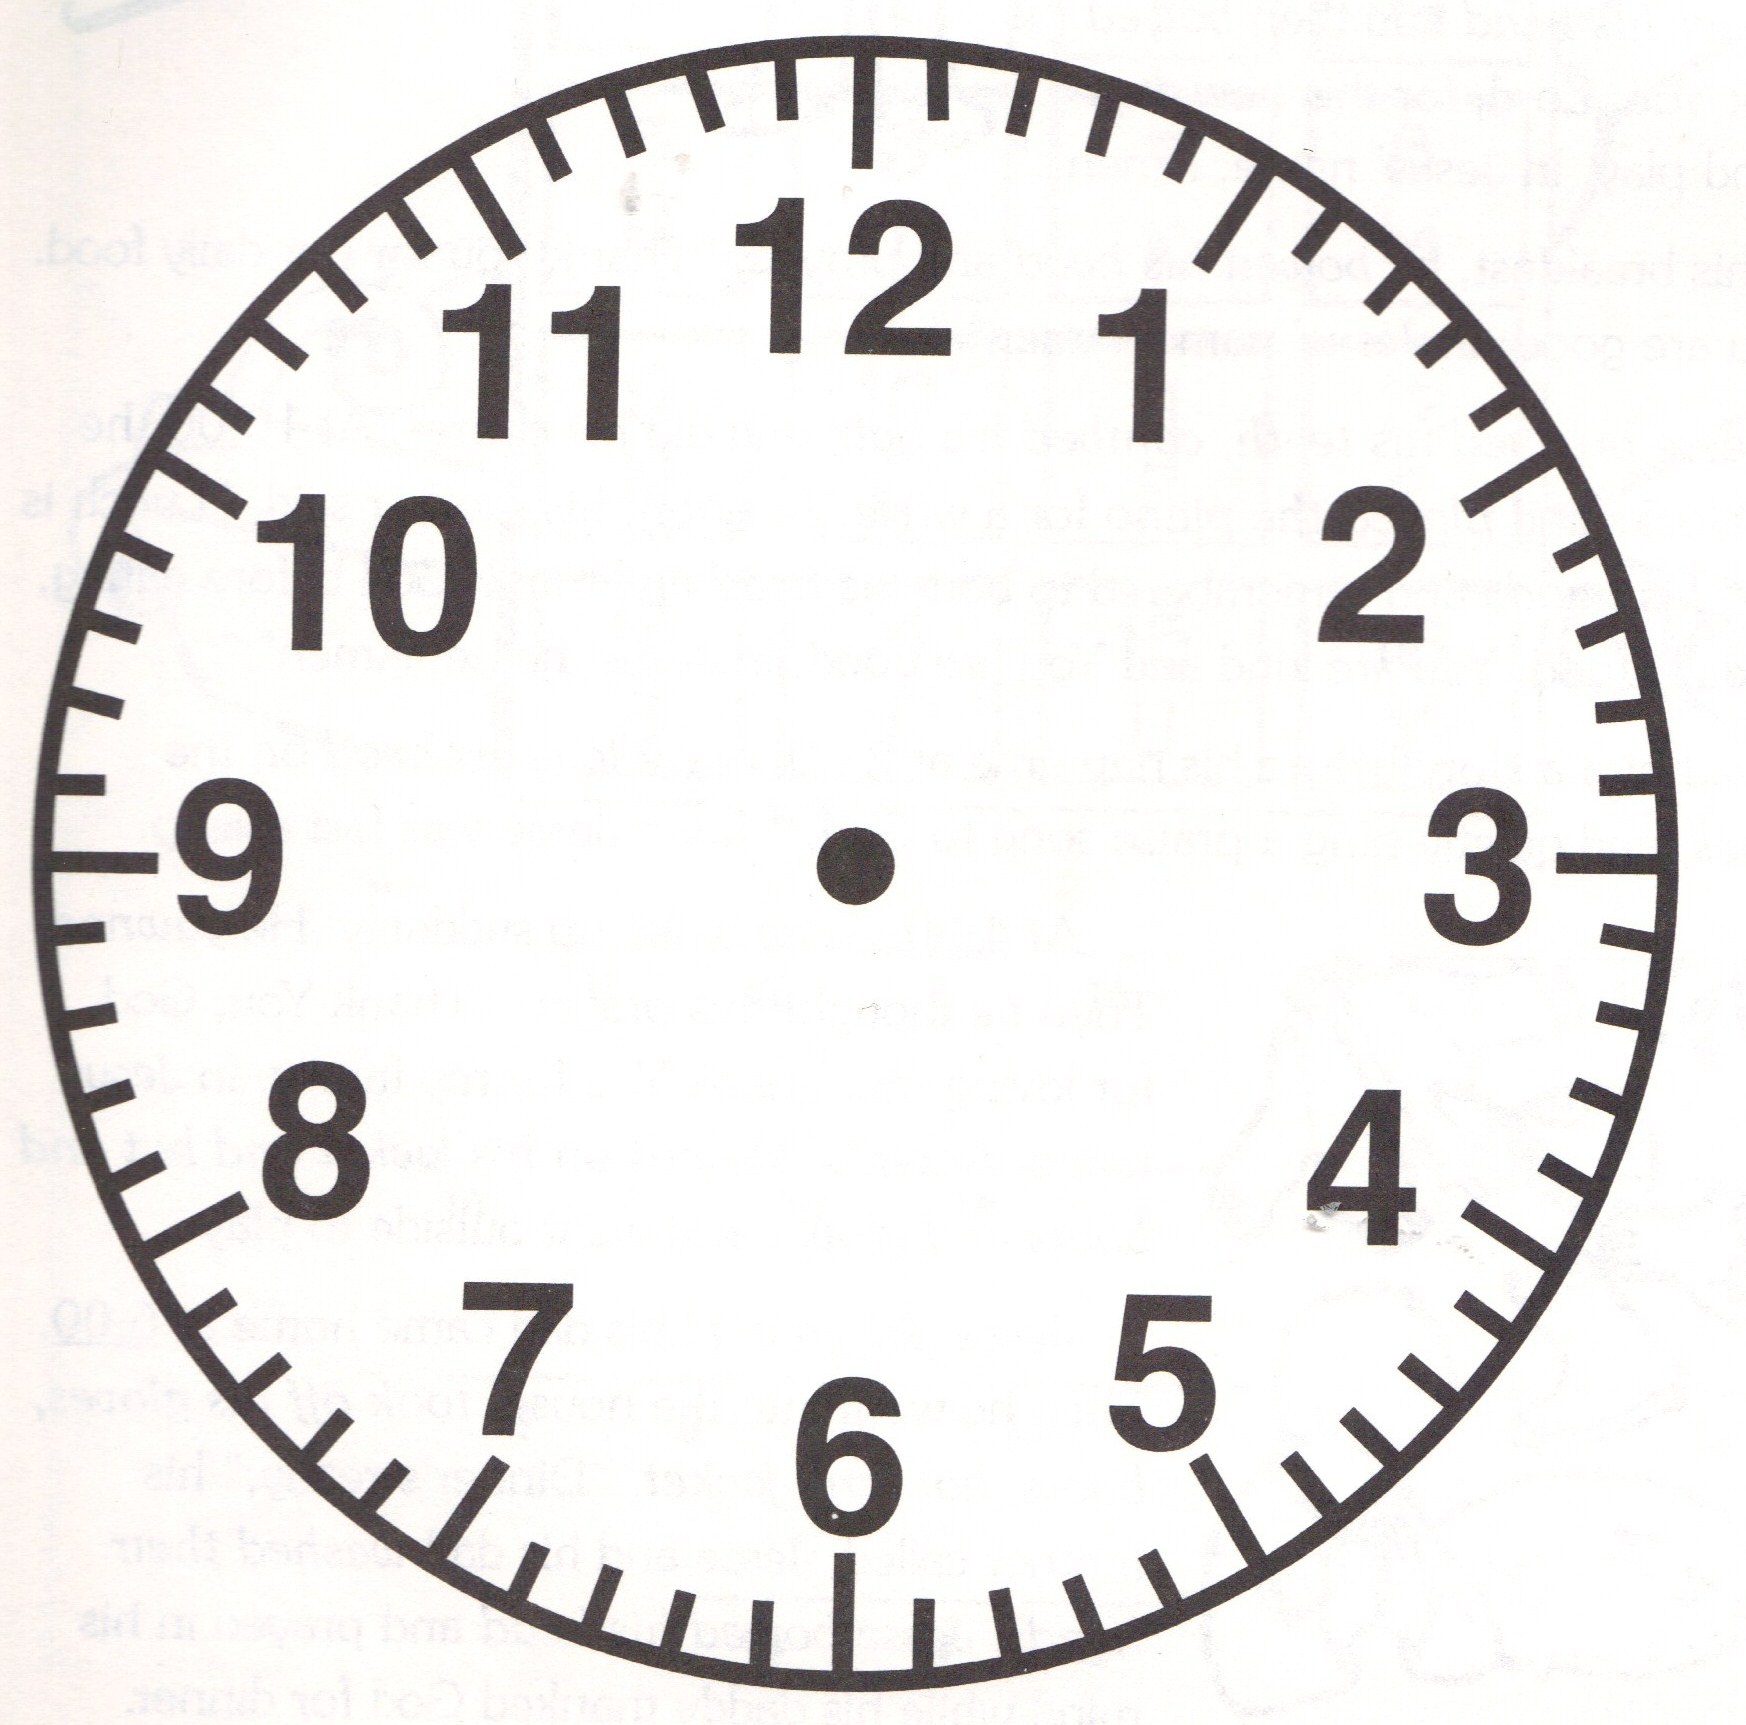 ... Printable Clock Face With